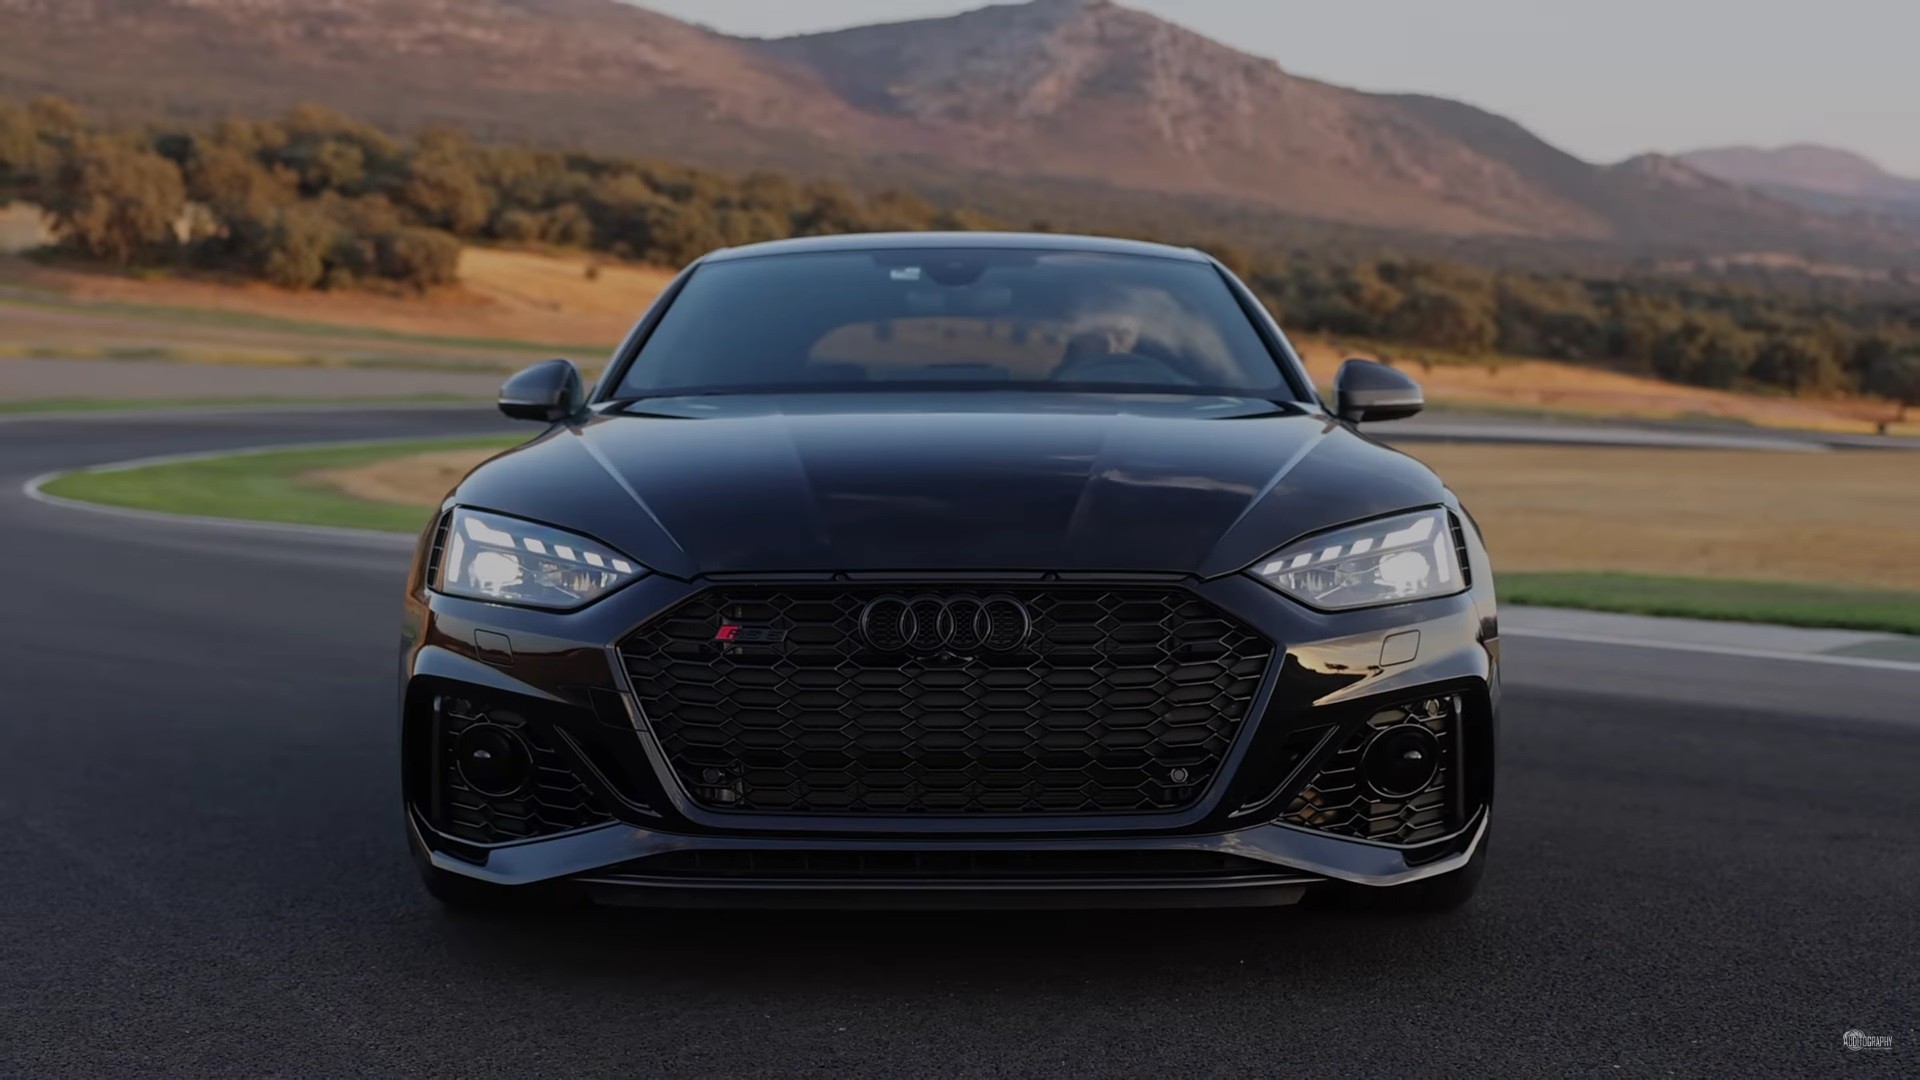 Auditography - Unique Audi photography - Even though the B8 Audi